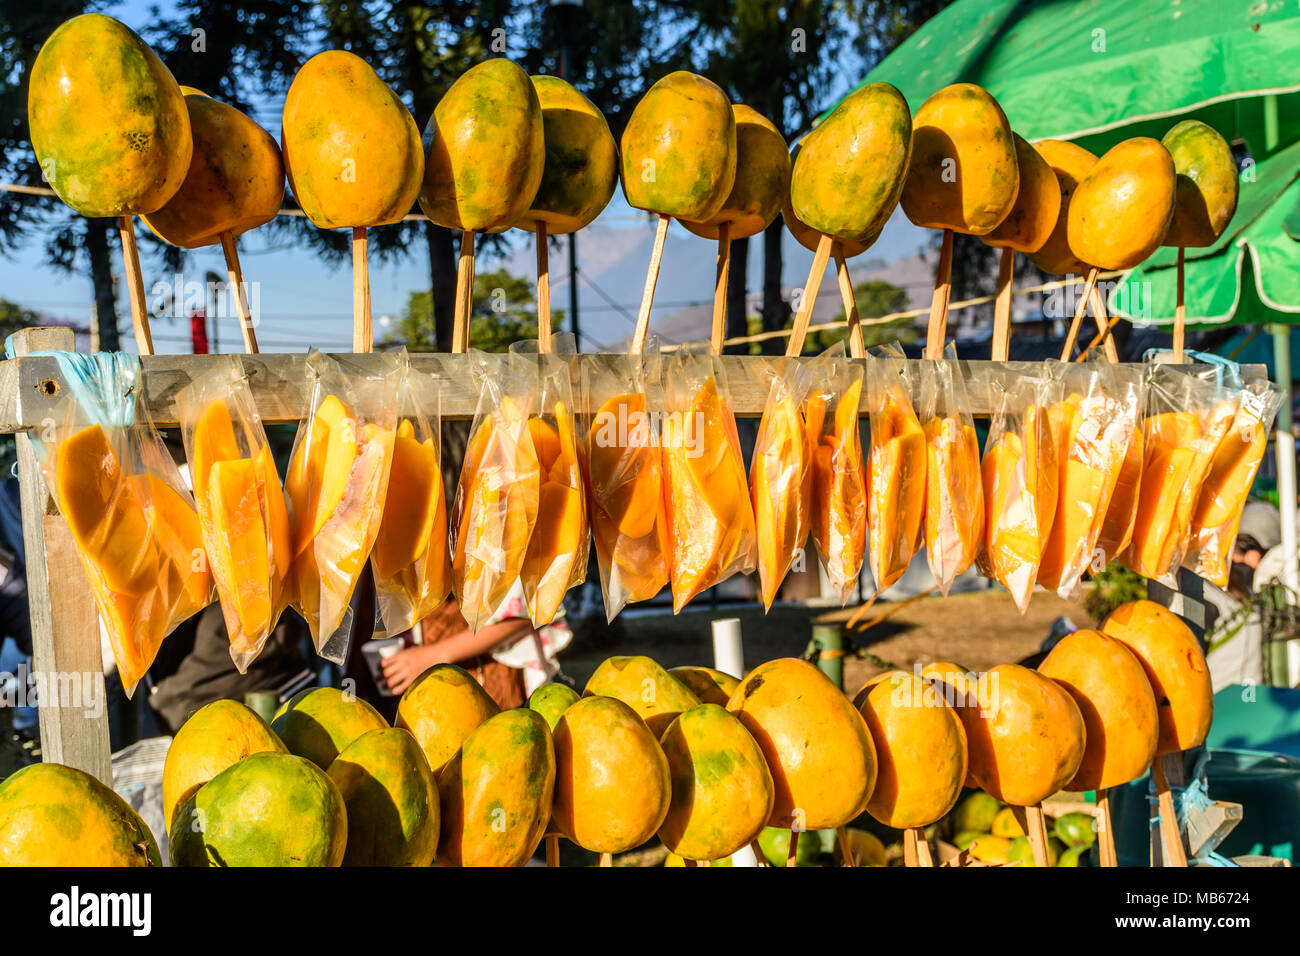 Whole ripe yellow mangoes on sticks & sliced ripe mangoes in bags on street  stall, Guatemala, Central America Stock Photo - Alamy